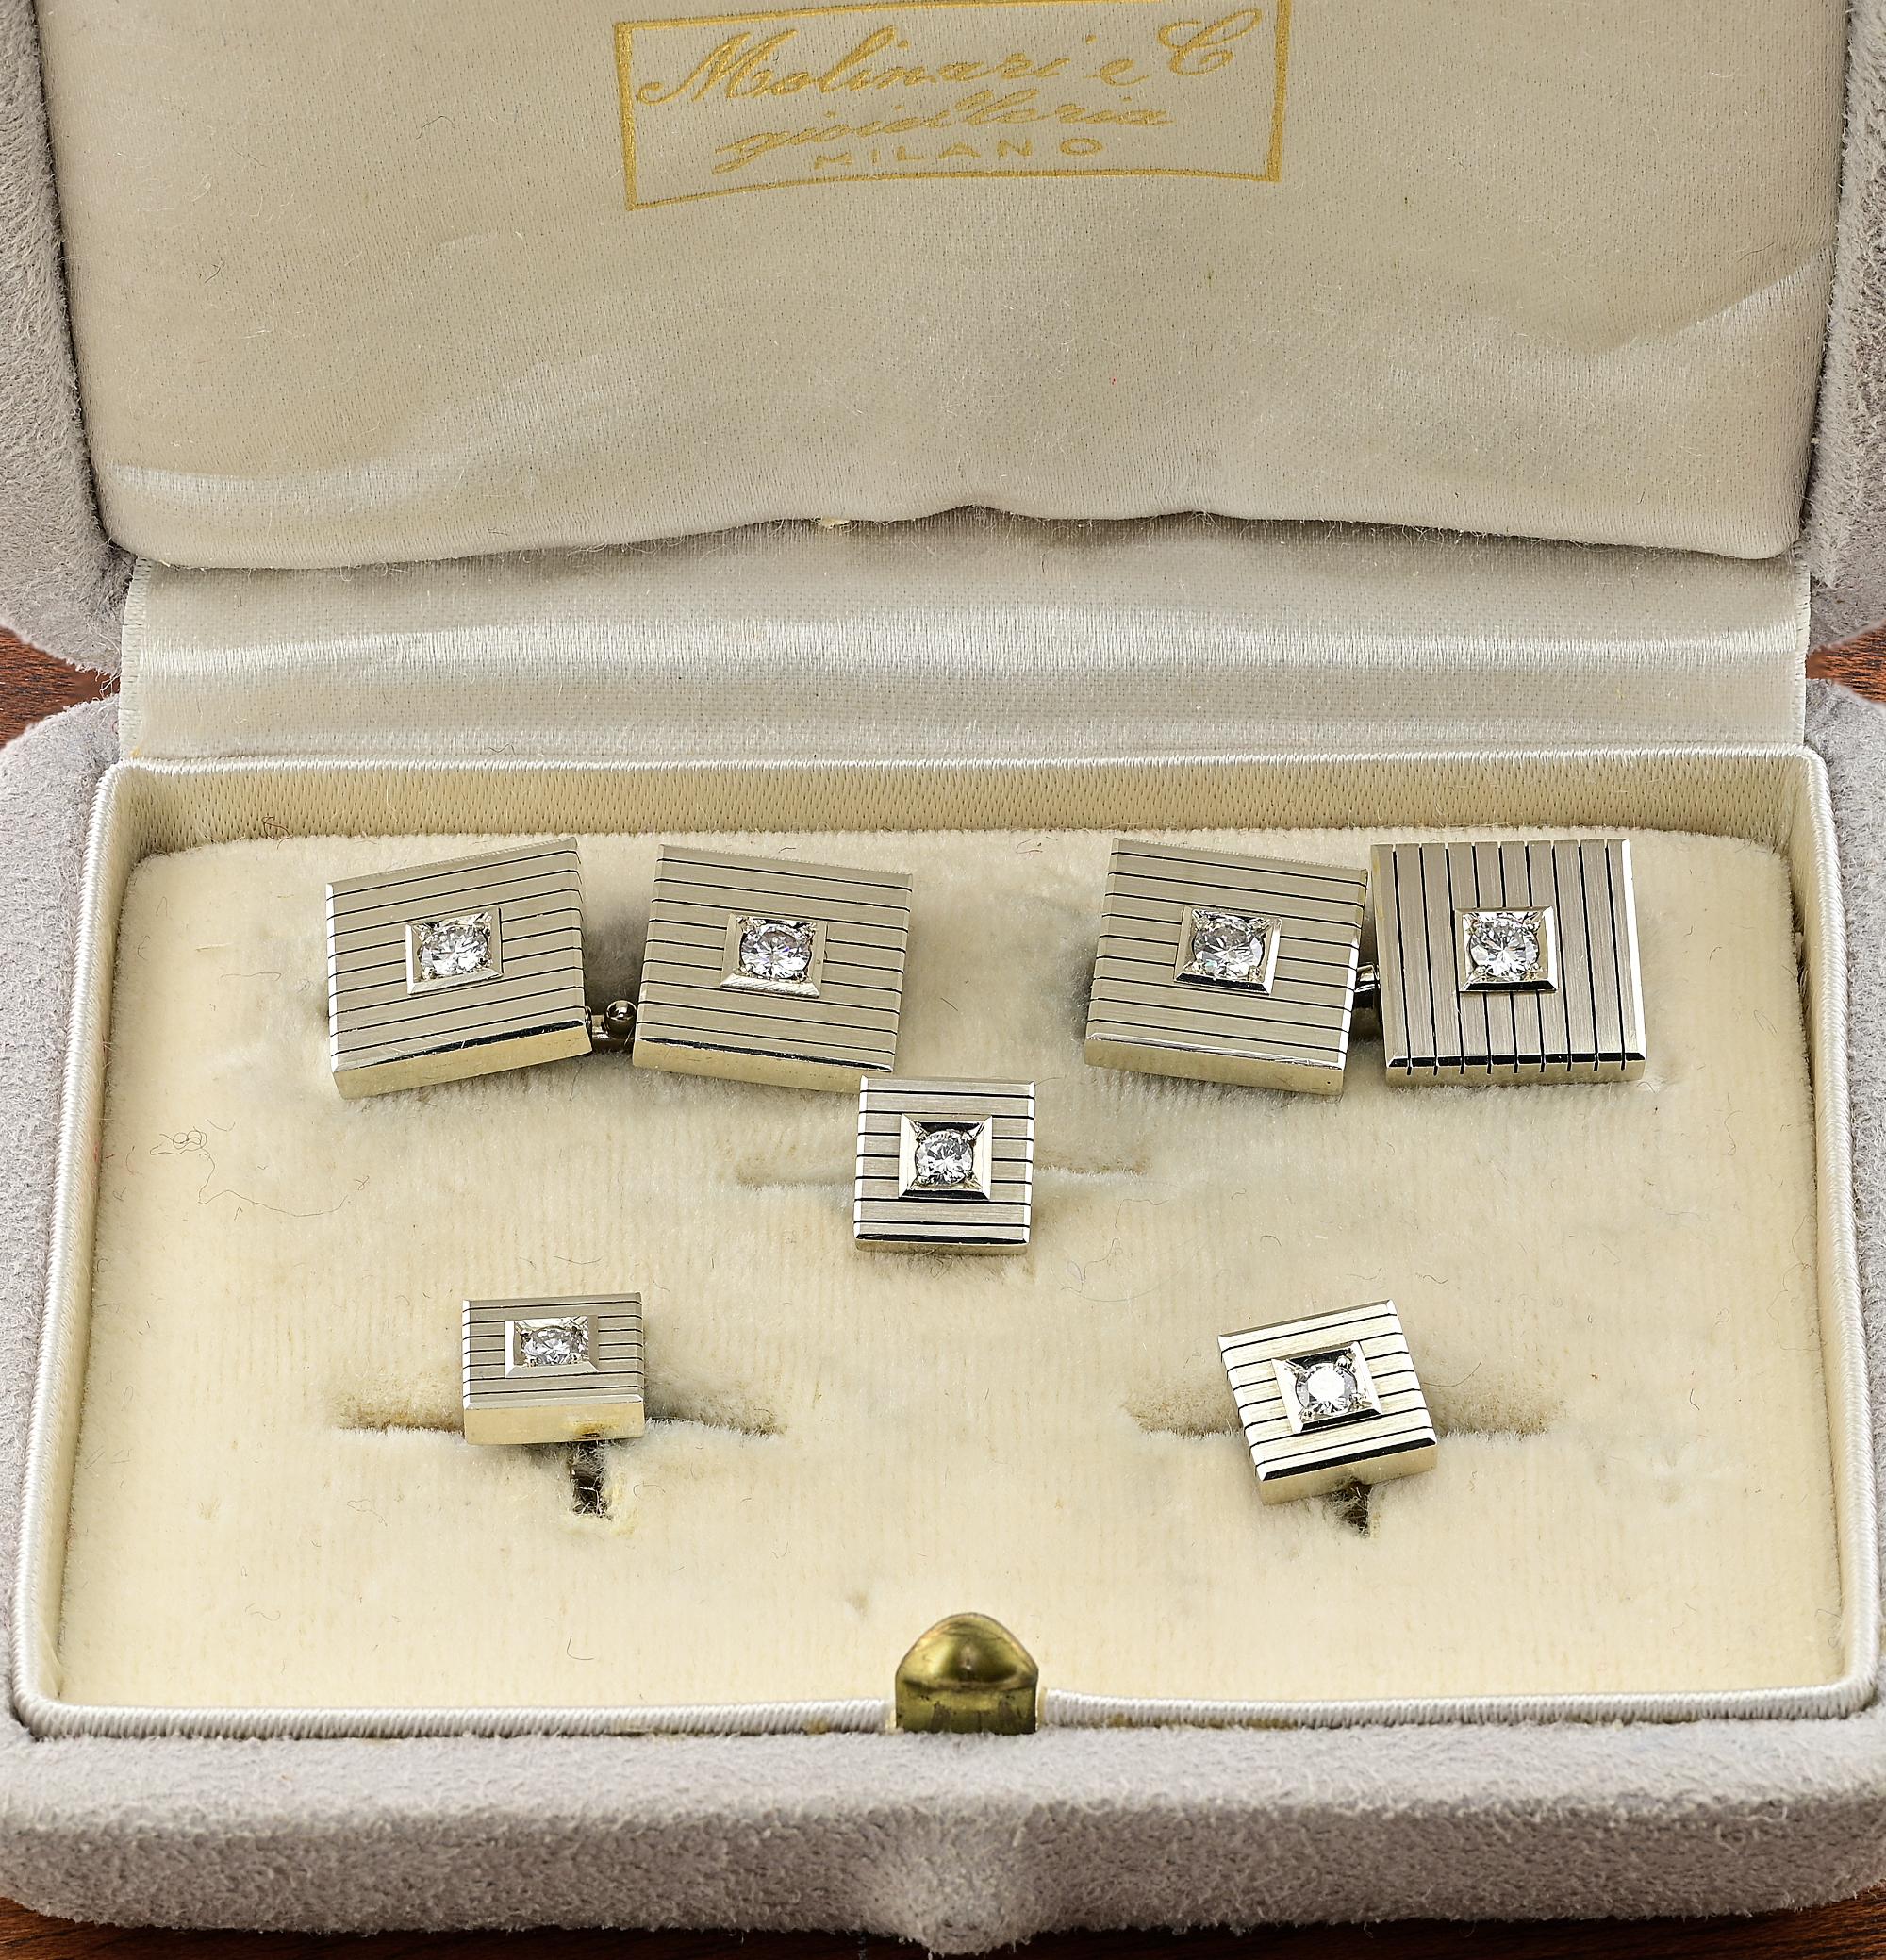 This stunning mid-century Diamond Cufflink tuxedo set is 1970 circa
Italian made Milan
Fascinating geometries of the 70’s - sturdy squared designed of substantial 18 KT gold assay, enhanced by carved stripes and Diamonds highlights
Set with a